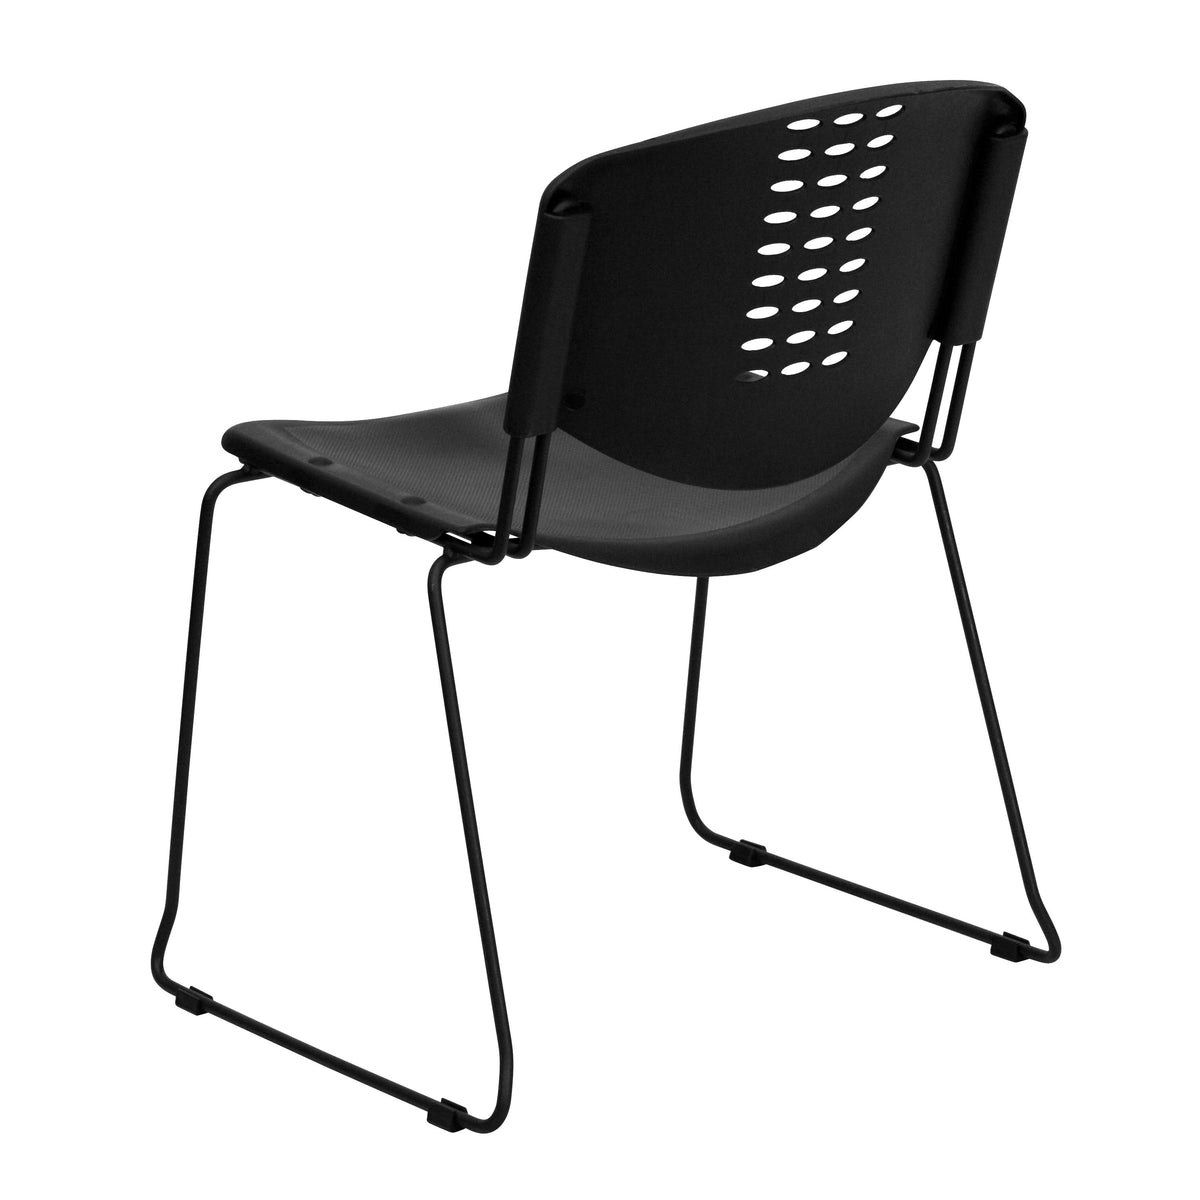 400 lb. Capacity Black Plastic Stack Chair with Black Frame and Textured Seat